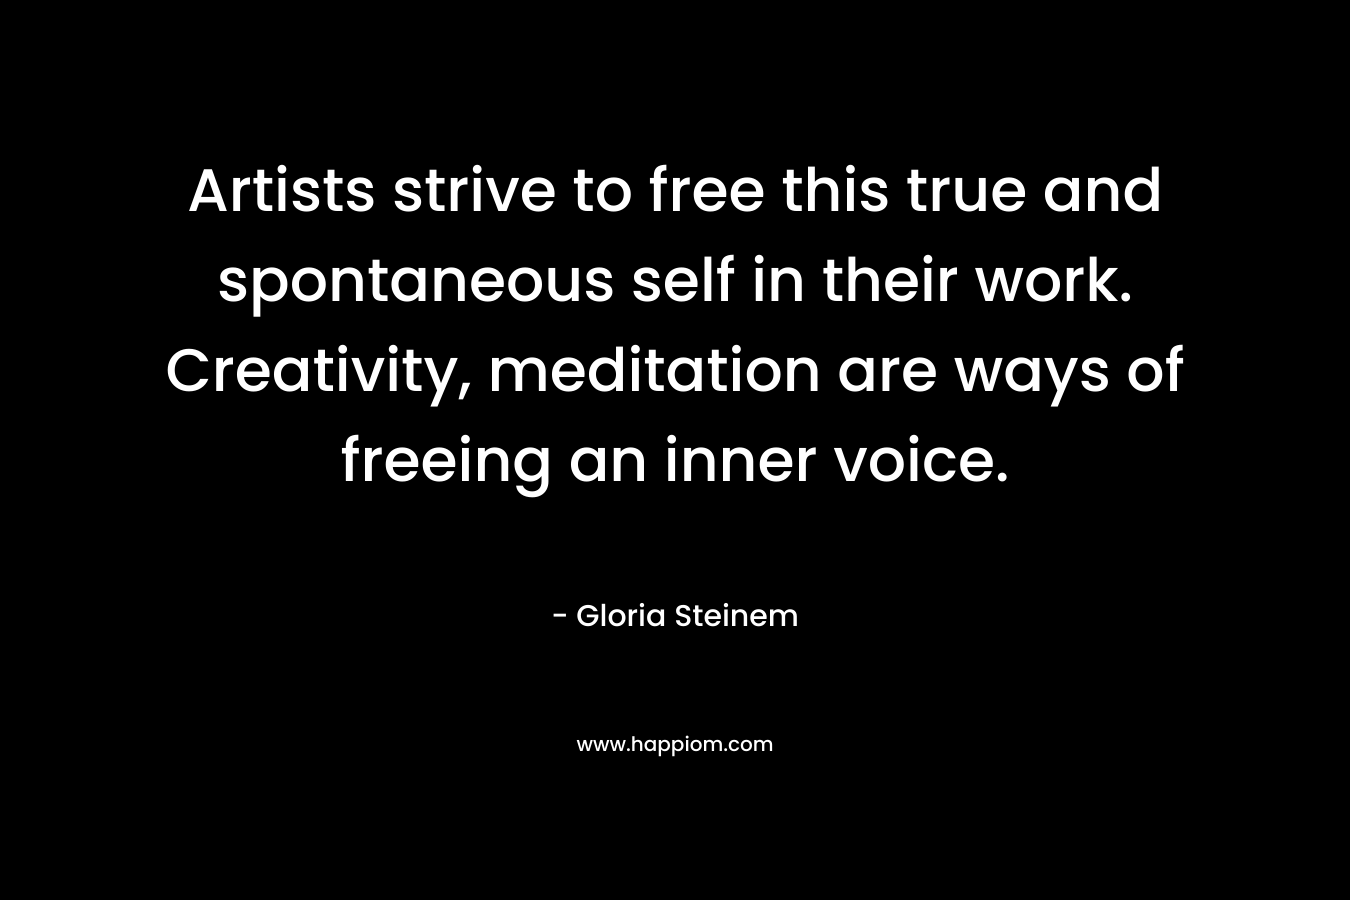 Artists strive to free this true and spontaneous self in their work. Creativity, meditation are ways of freeing an inner voice.